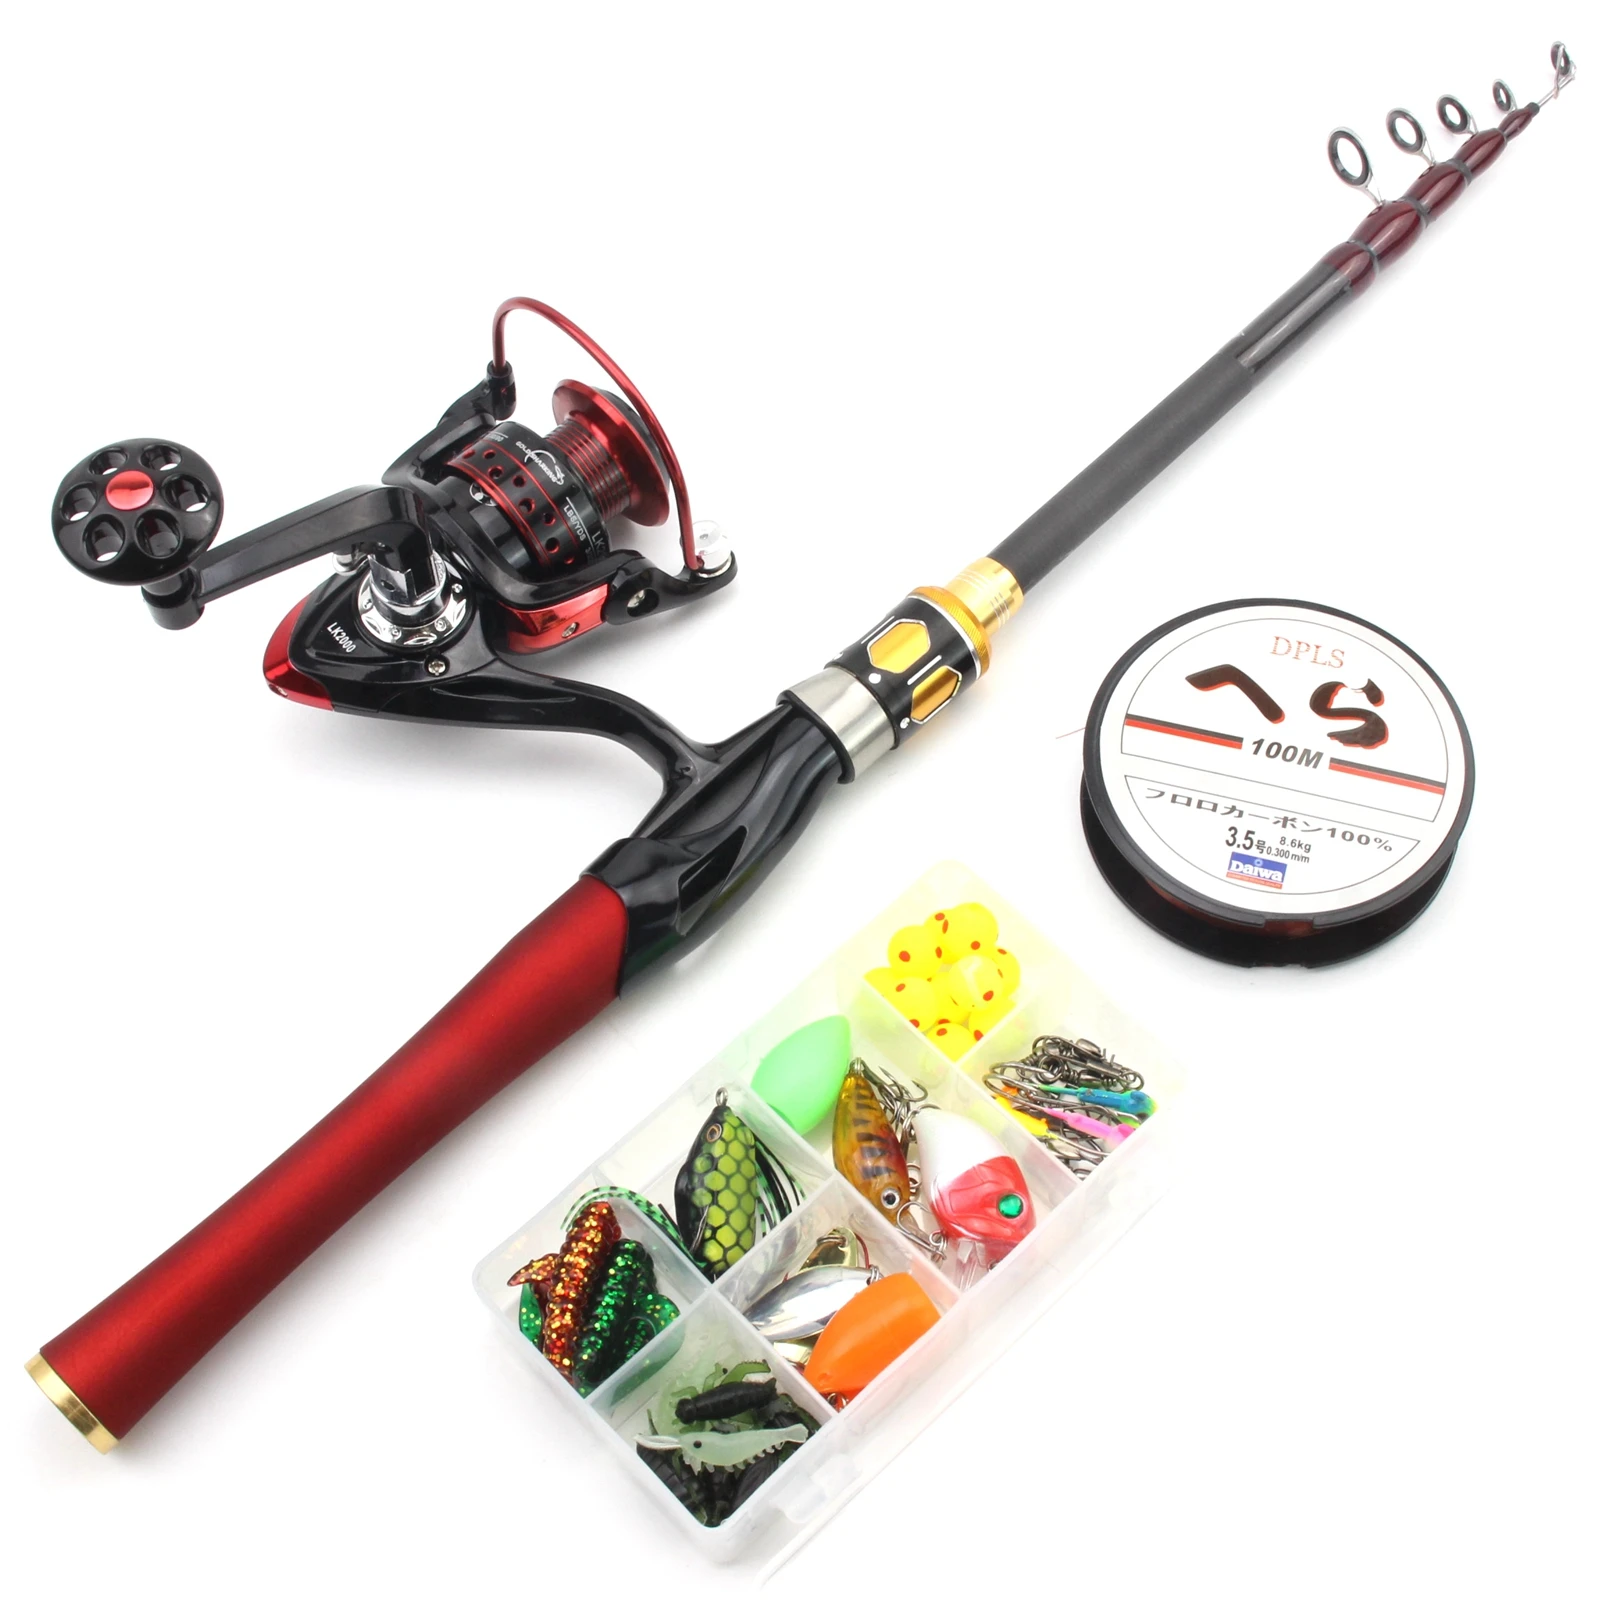 

2.1M Fishing rod with reel Casting Rod and reel Soft bait Fish hook bag set Travel lure Trout Portable telescopic fishing rod